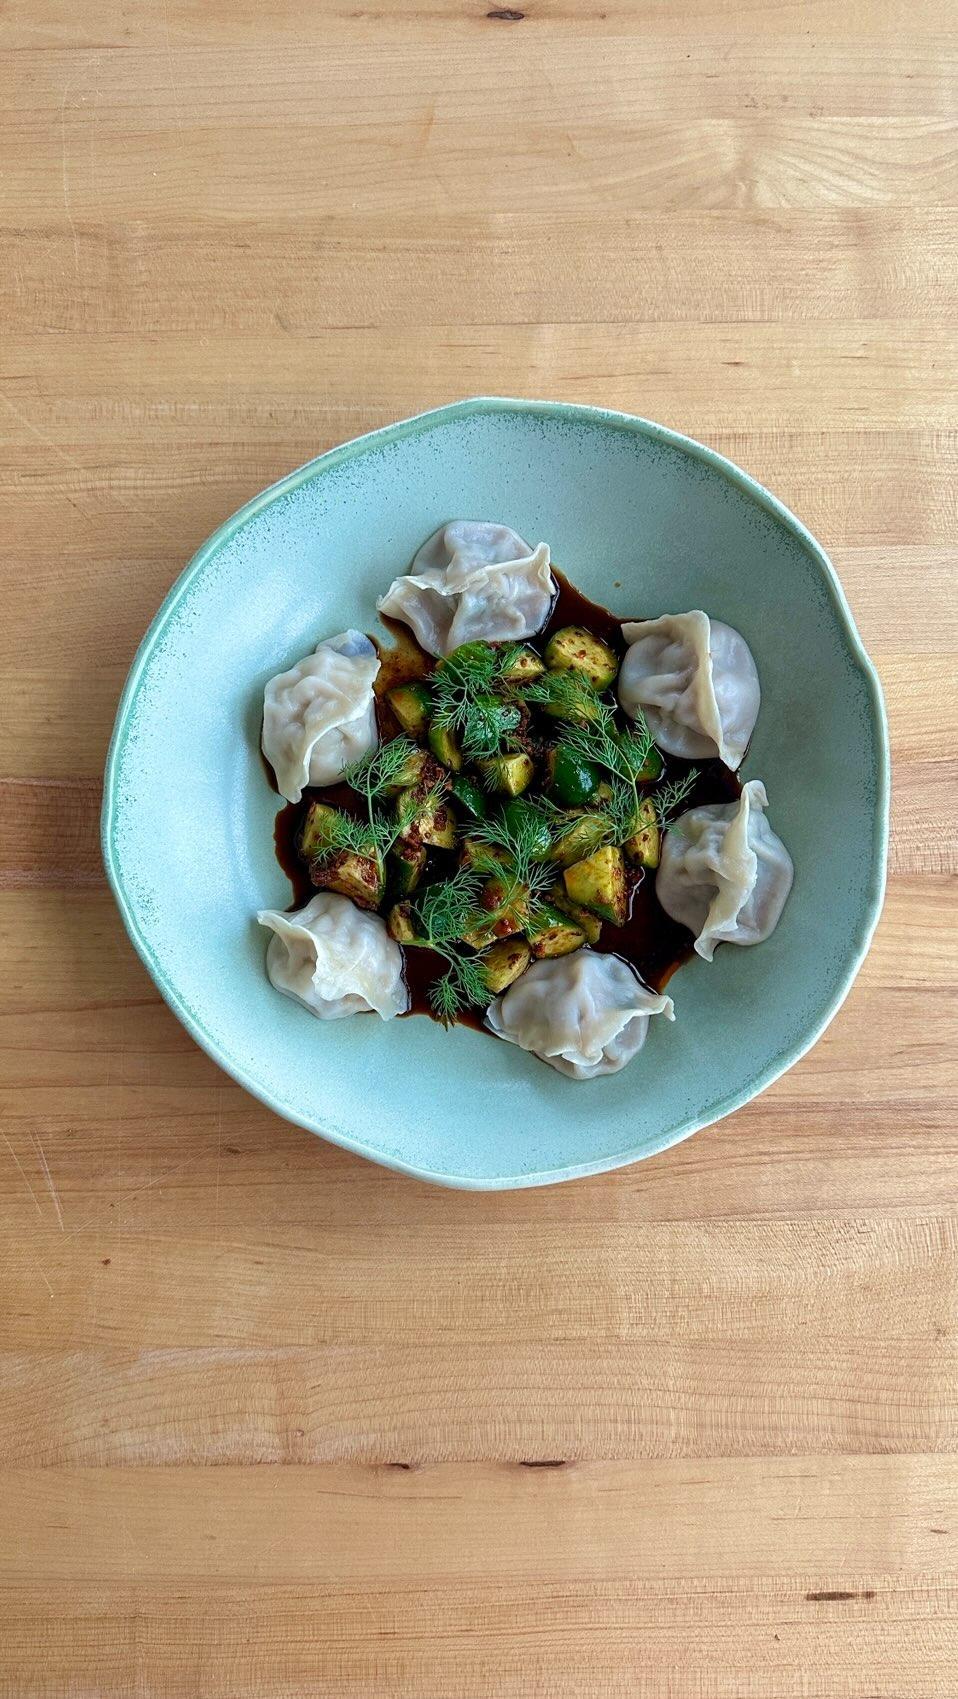 class="content__text"
 crazy bout d(u)mplings

P.s. obliques are one of my favorite knife cuts, something simple and satisfying about it

 #dumplings #easycooking #lunchideas #taste #instayum 
 